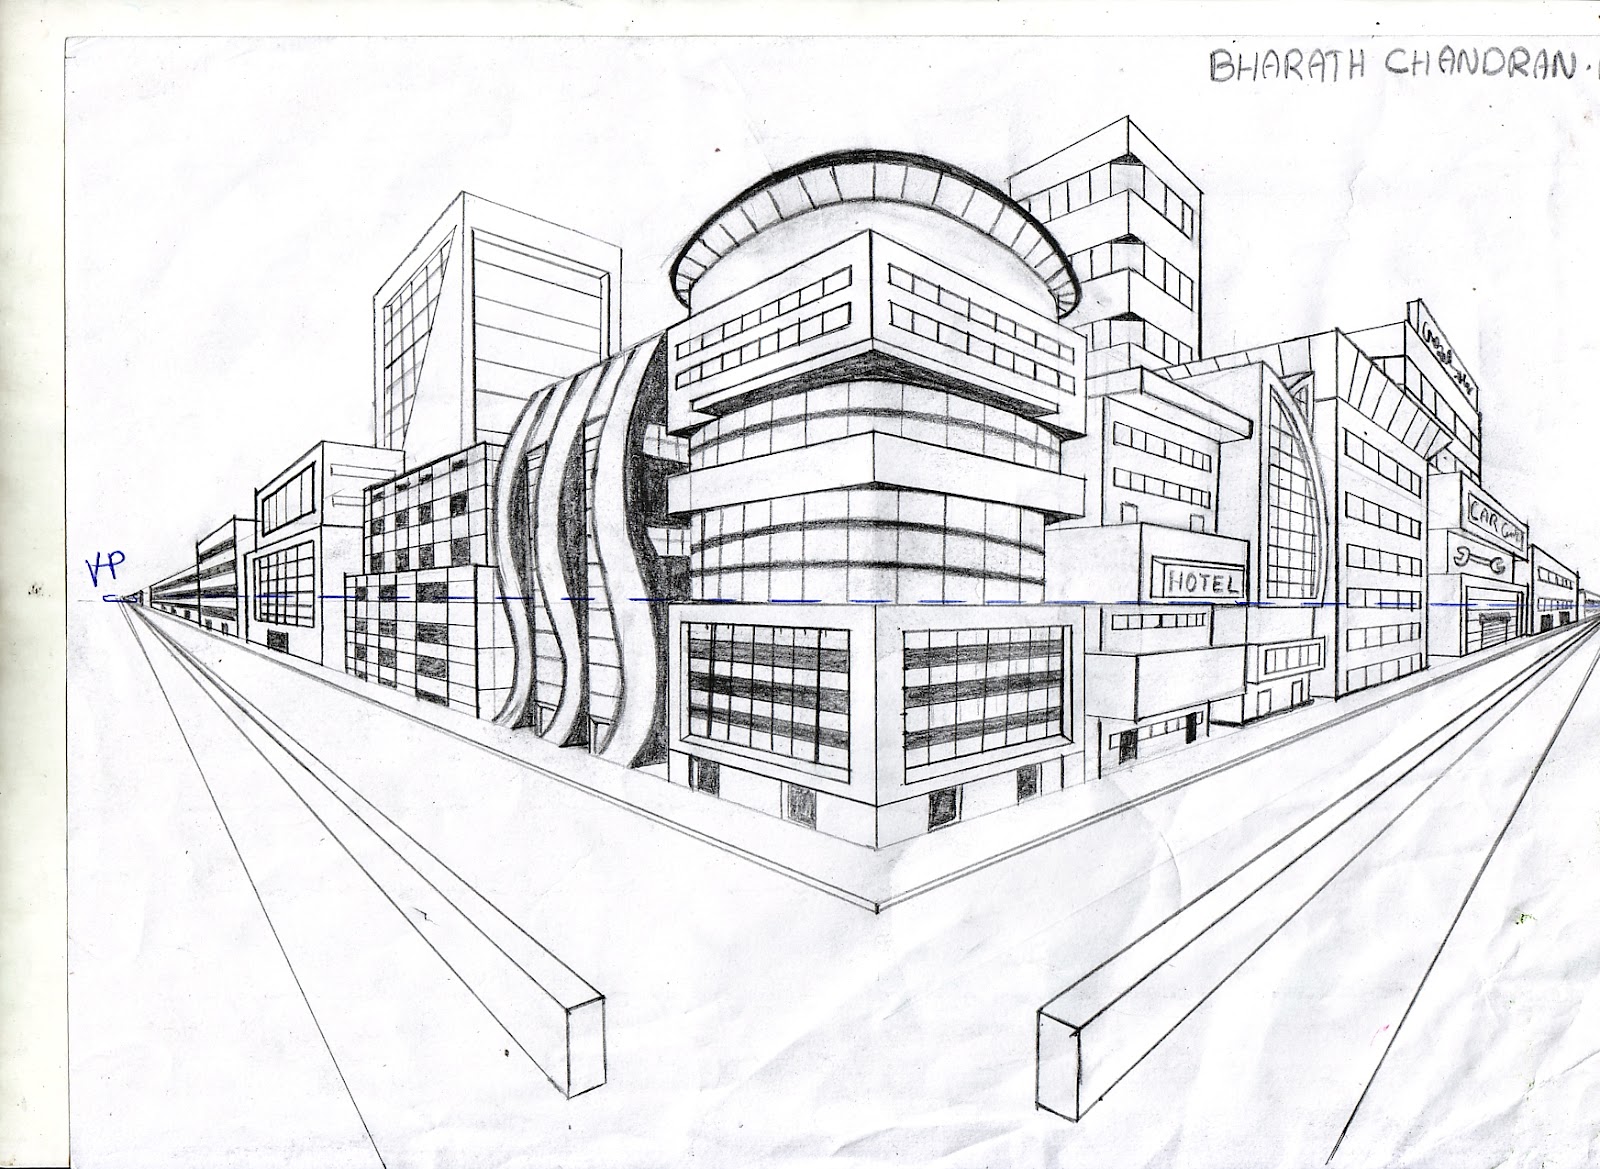 foundation art: two point perspective